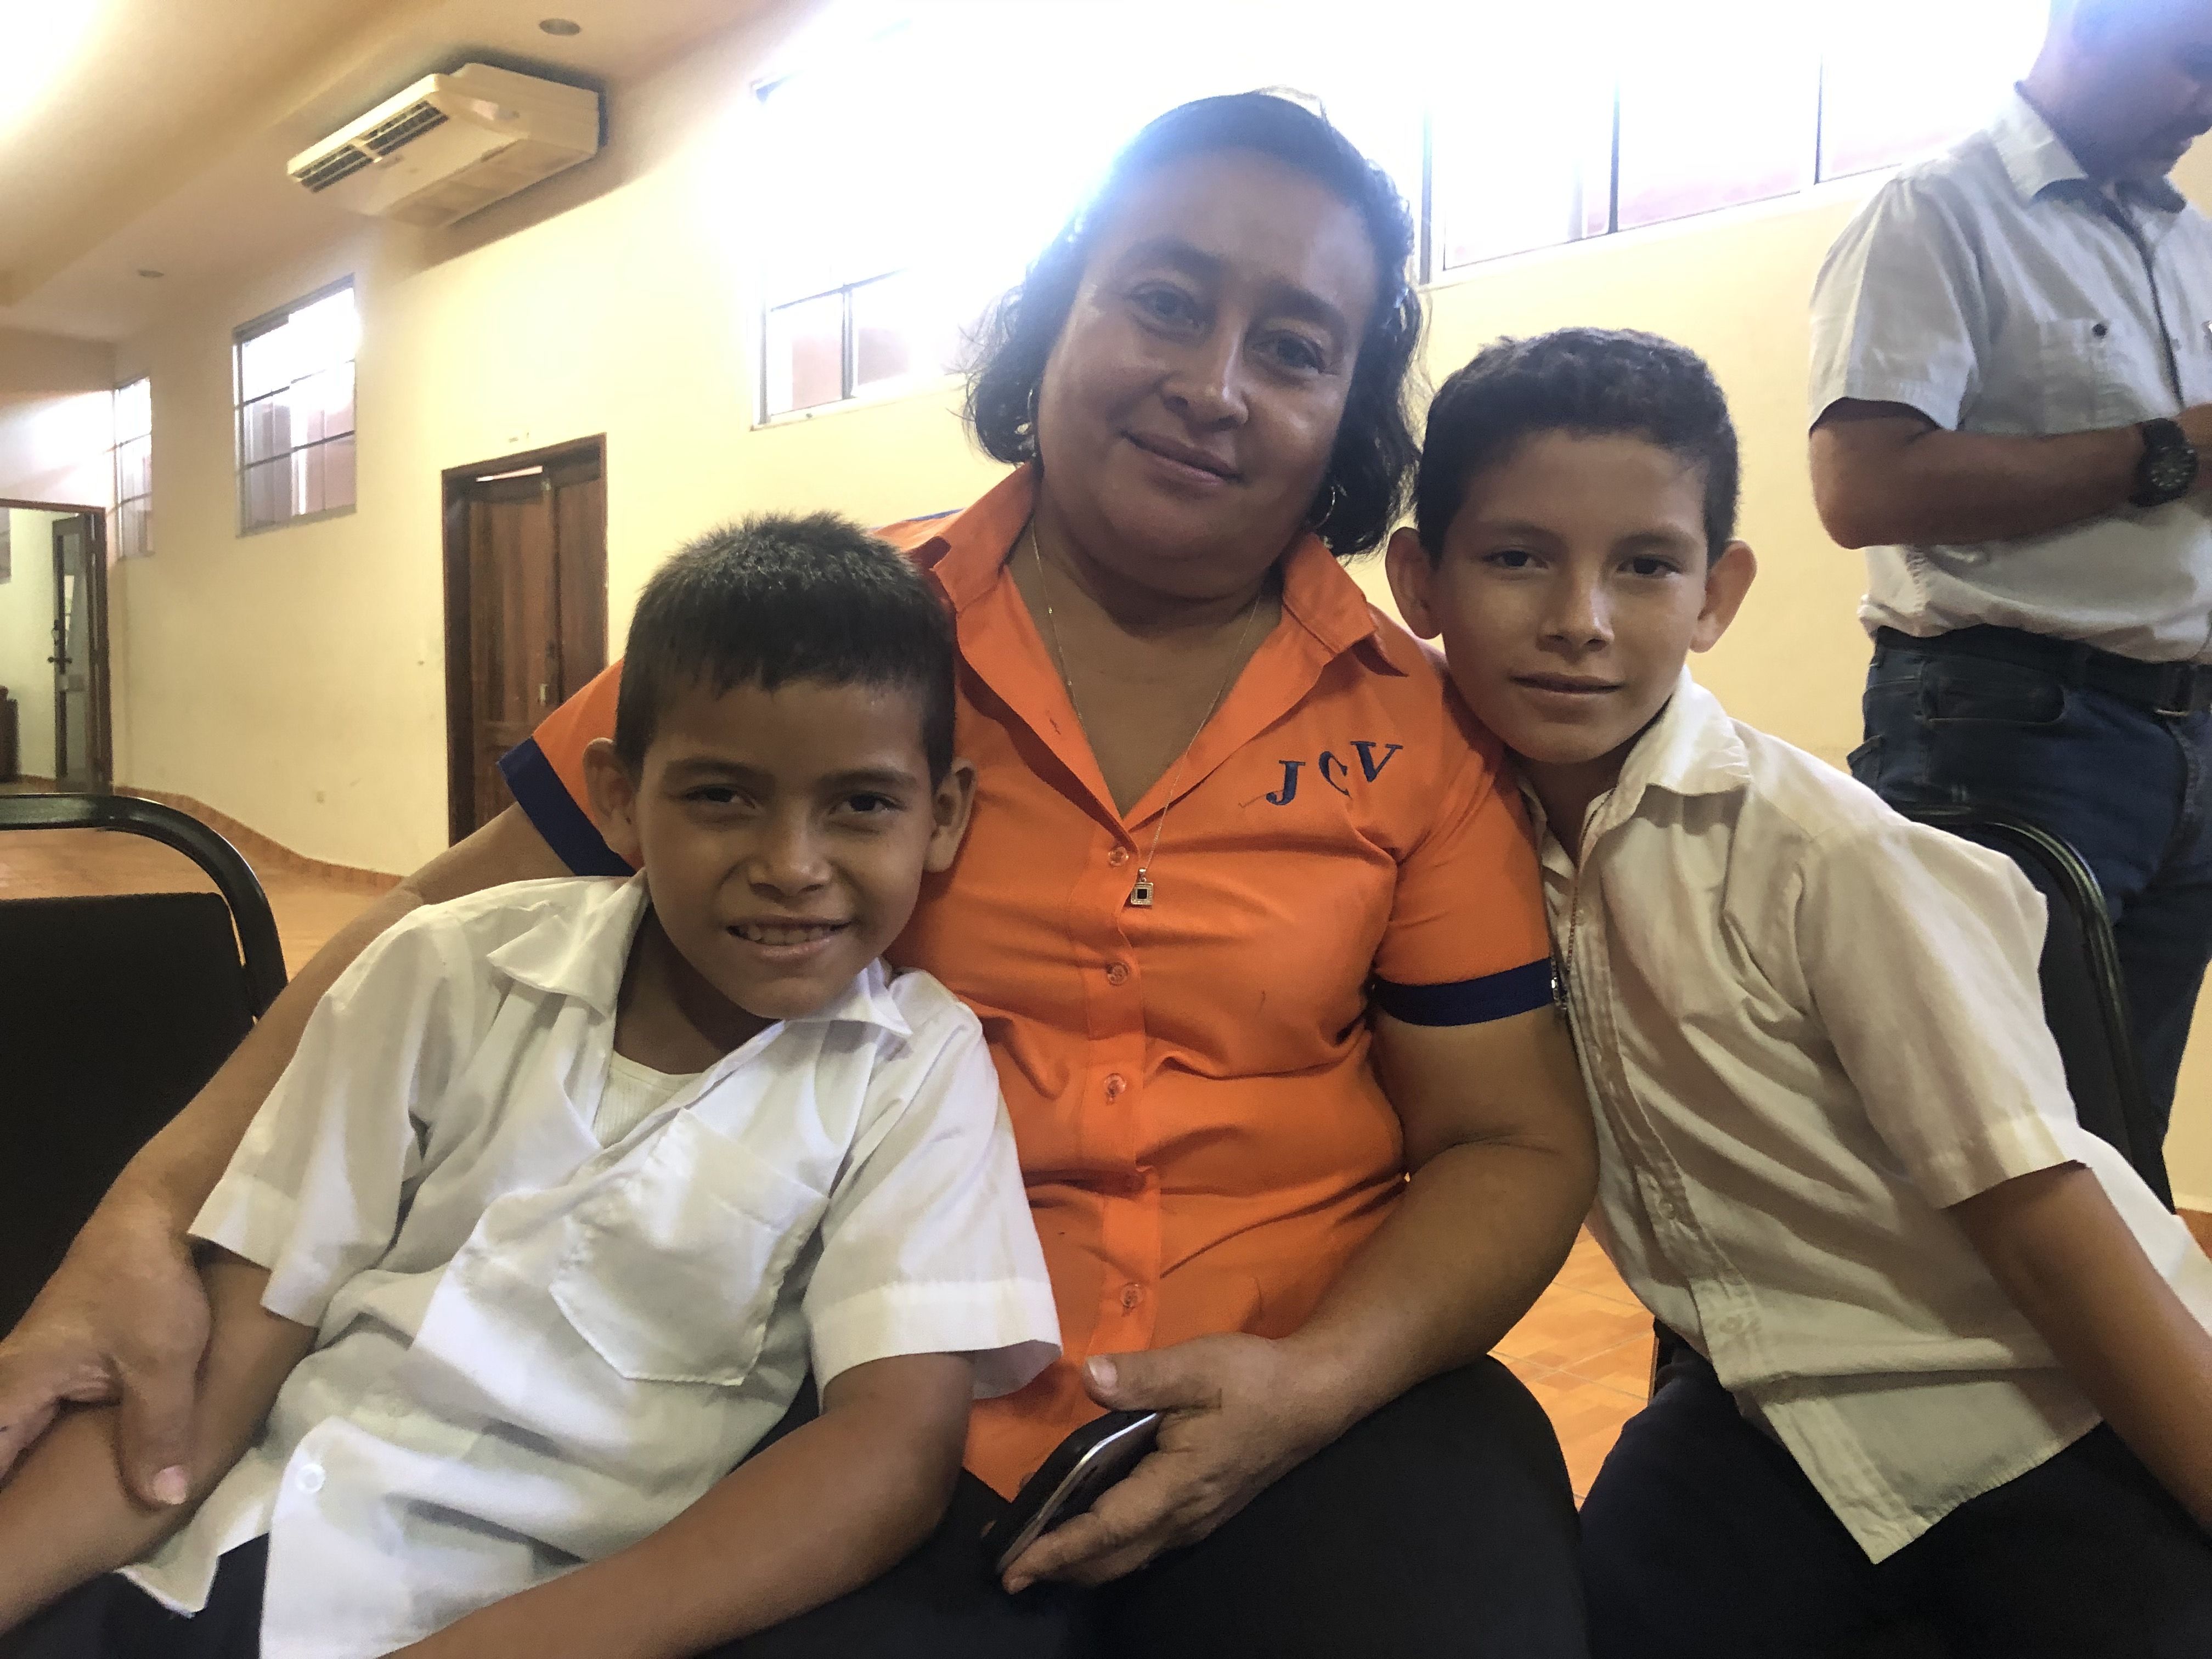 Berkling Yaiso (left) is 9. His brother Germán is 10. Here, at a community meeting in Potrerillos, they pose with one of their teachers. Image by Jaime Joyce/TIME for Kids. Honduras, 2019.